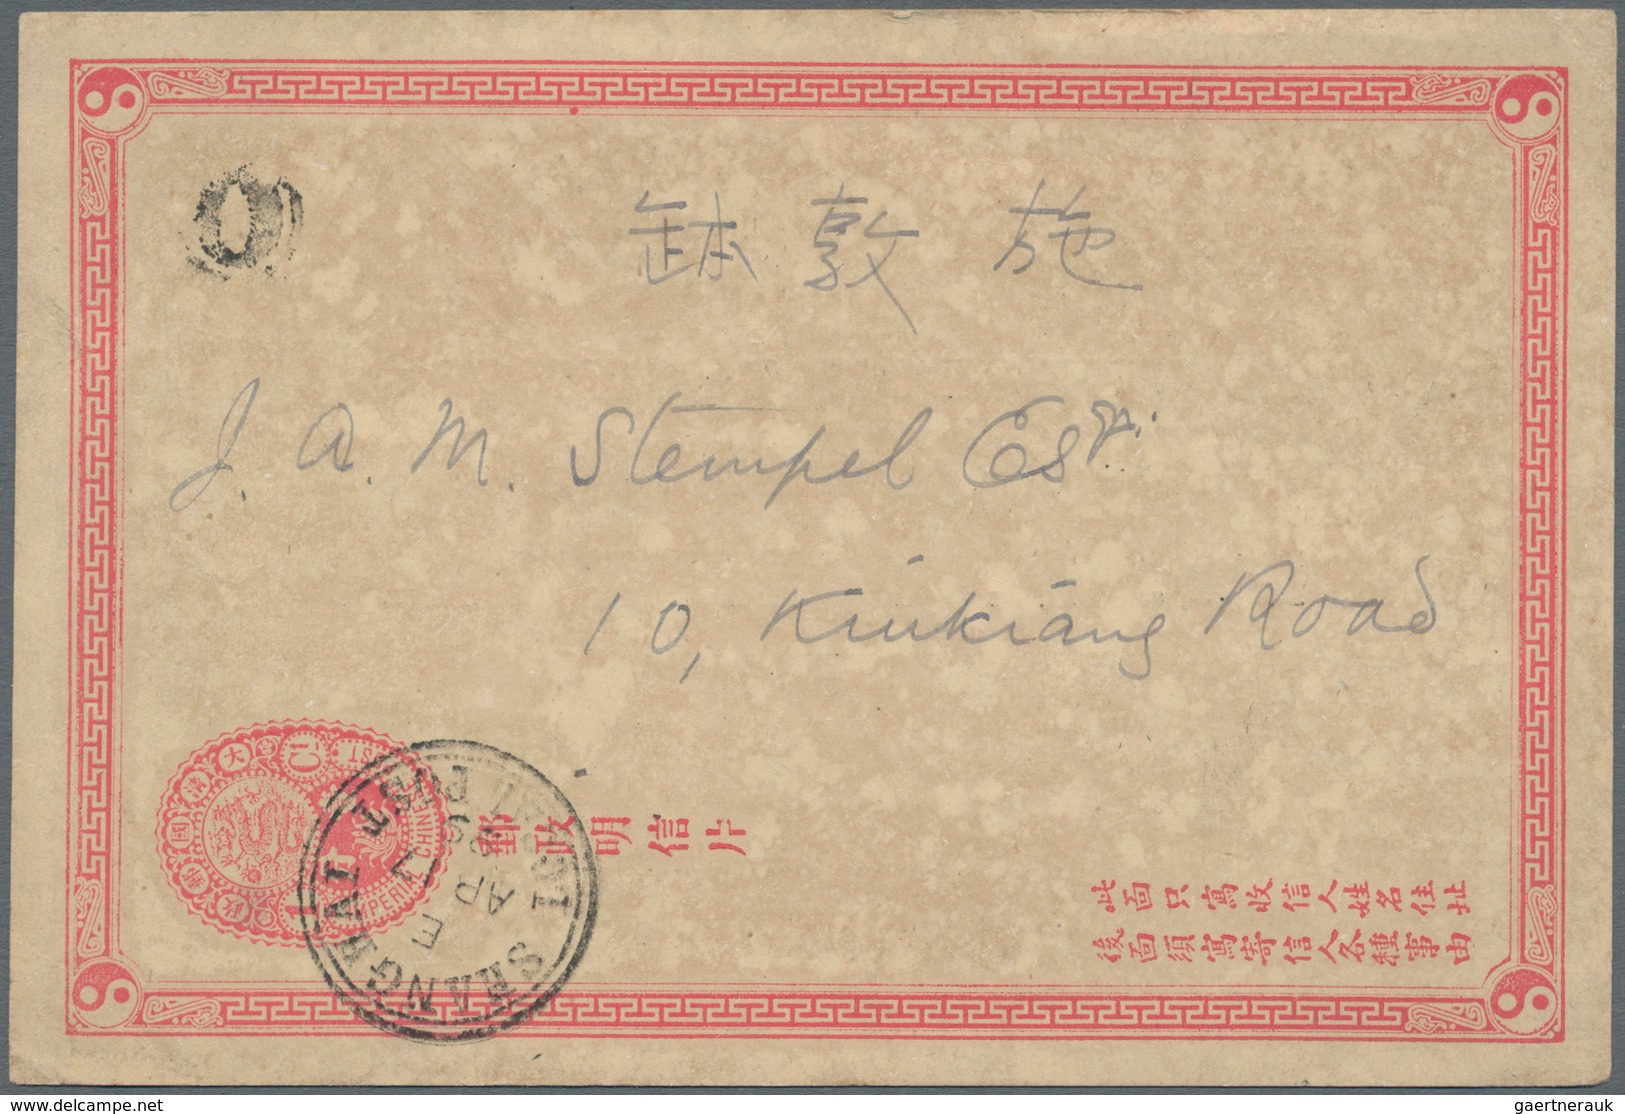 China - Ganzsachen: 1897, Card ICP 1 C. Canc."SHANGHAI LOCAL POST E AP 17 99" Used Local With Messen - Postales